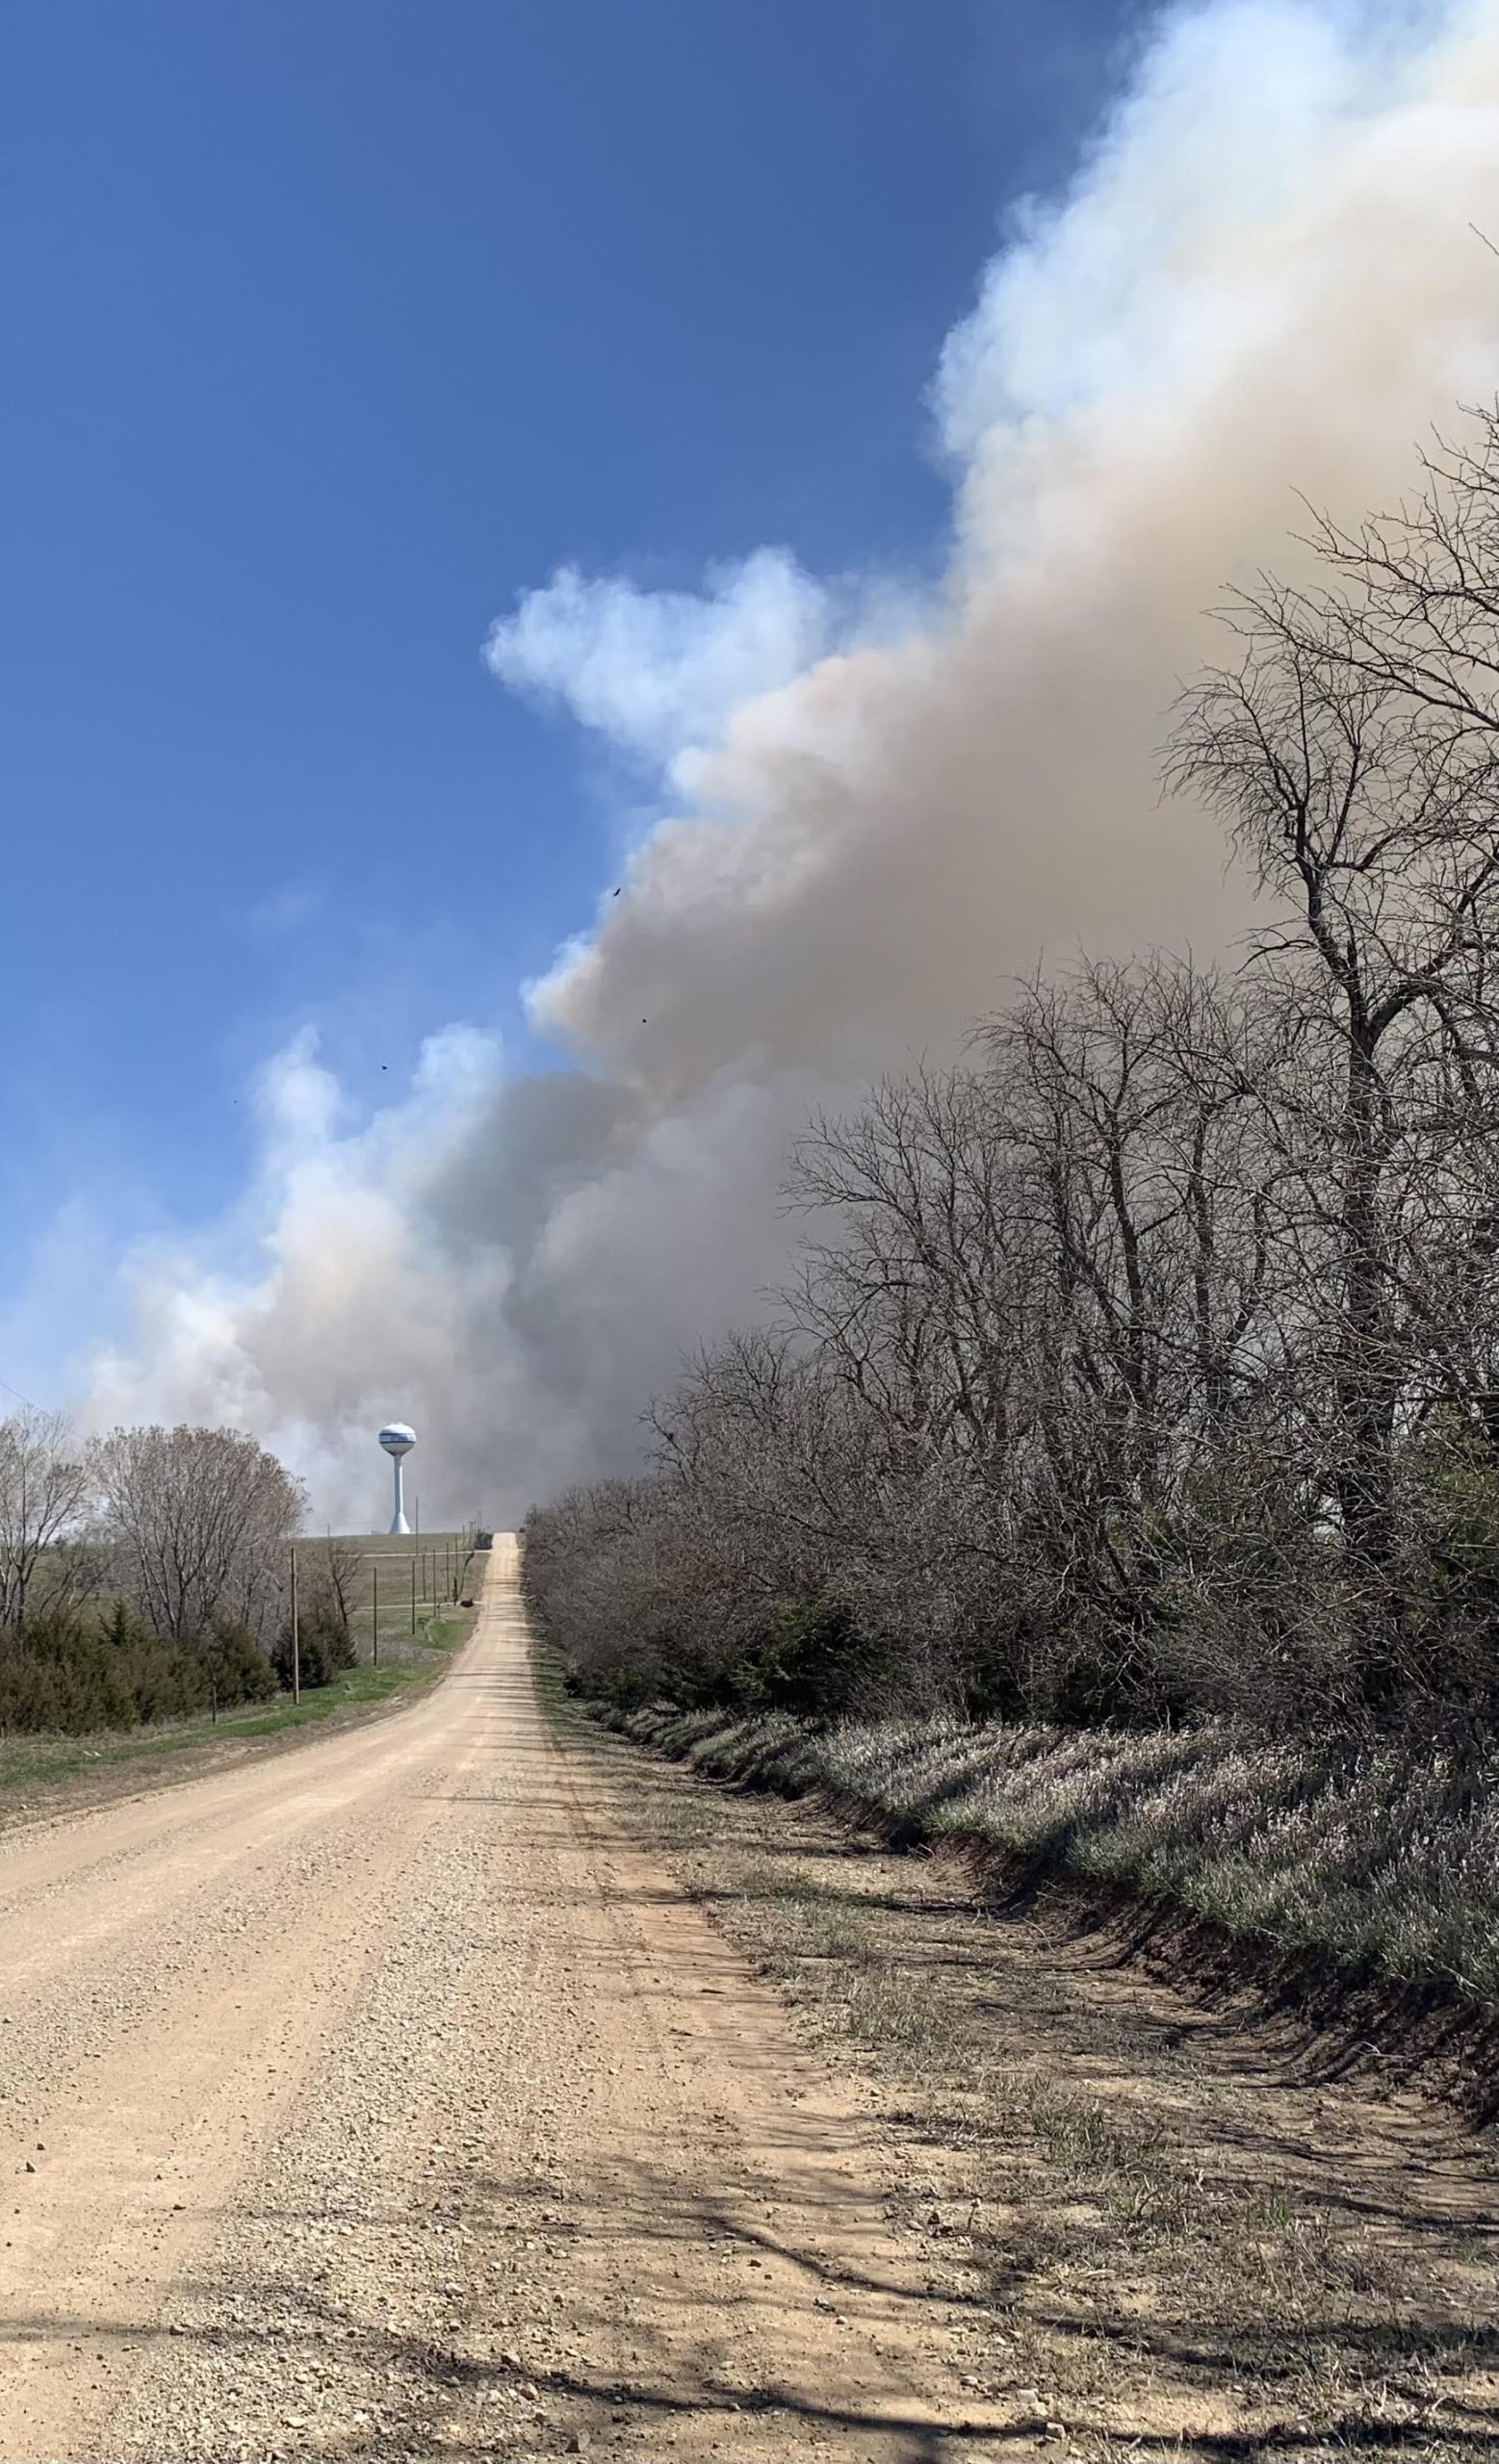 Visibility may be reduced from smoke and flames when grass and crop stubble are being burned, such as in this April 4 fire in southeastern Ottawa County. (Photo by Tim Unruh.)